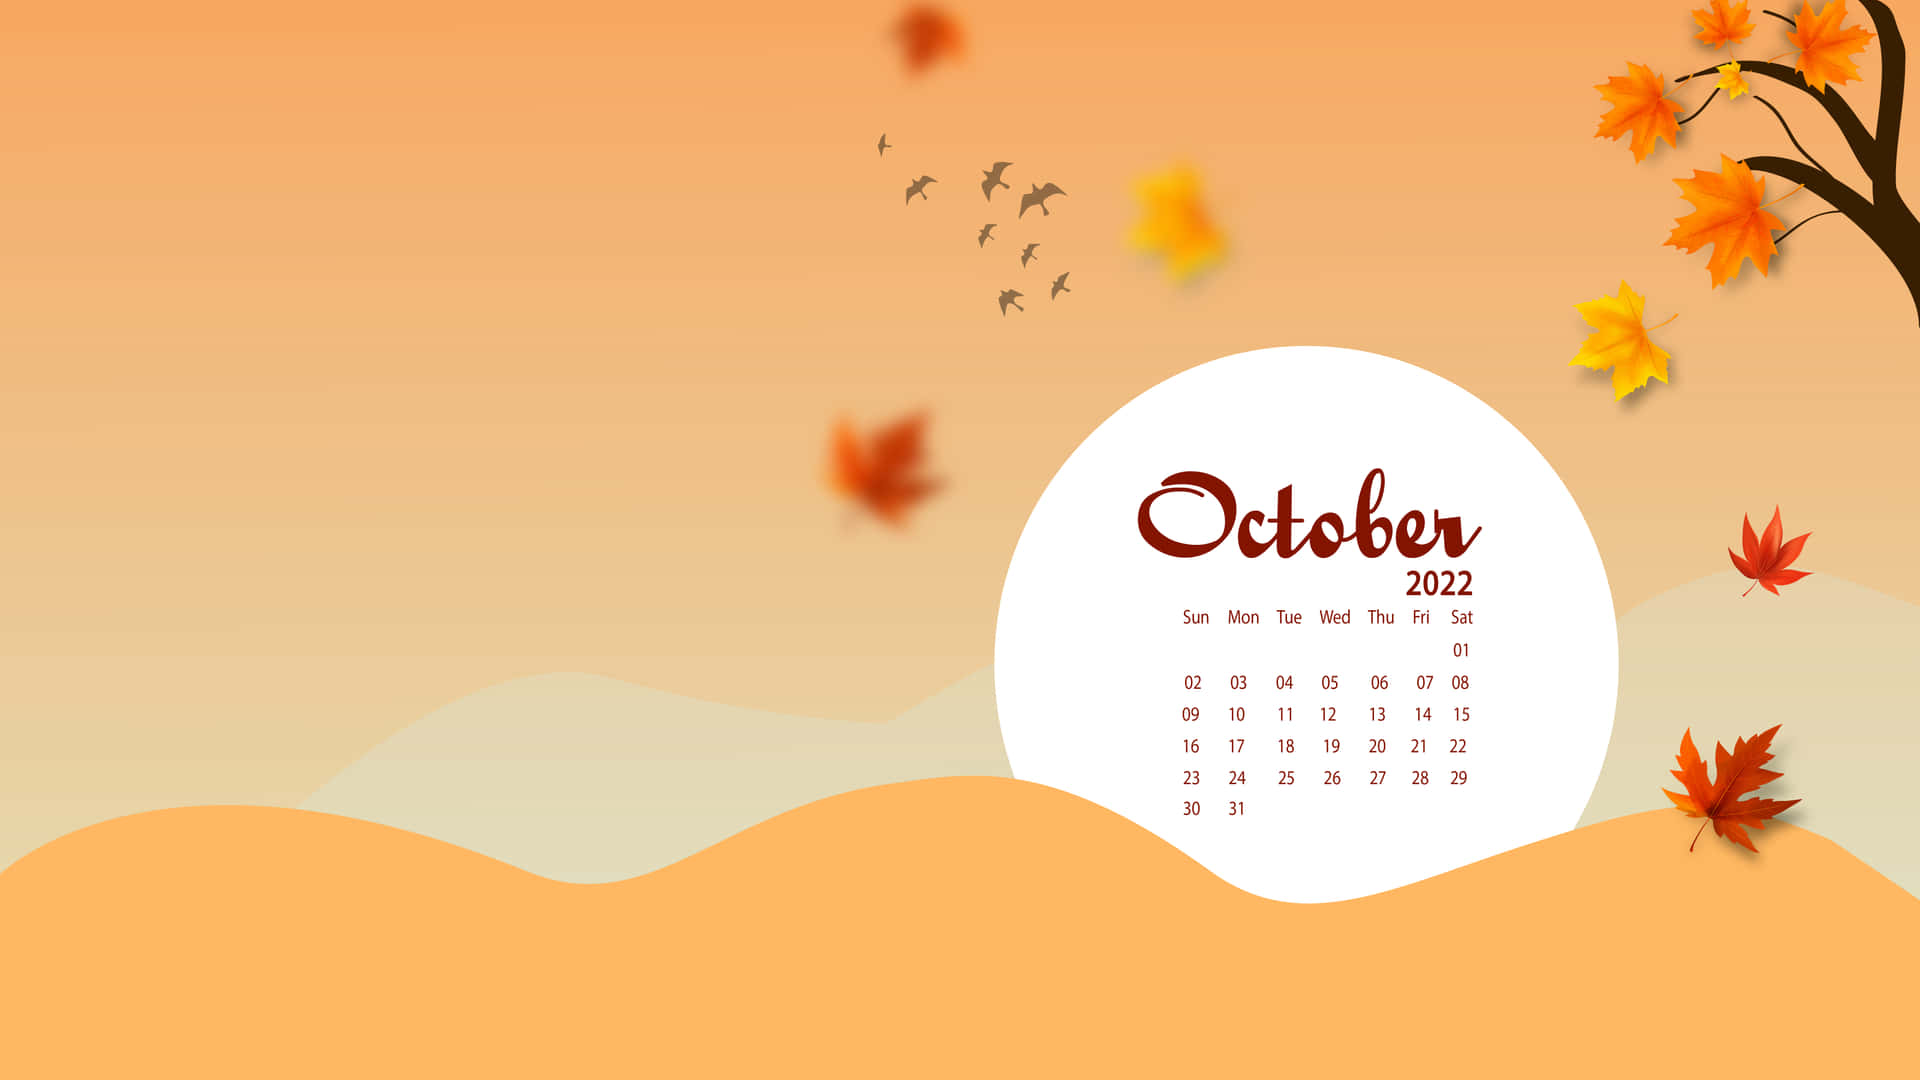 Get organized and stay on top of life's dates with this printable calendar background